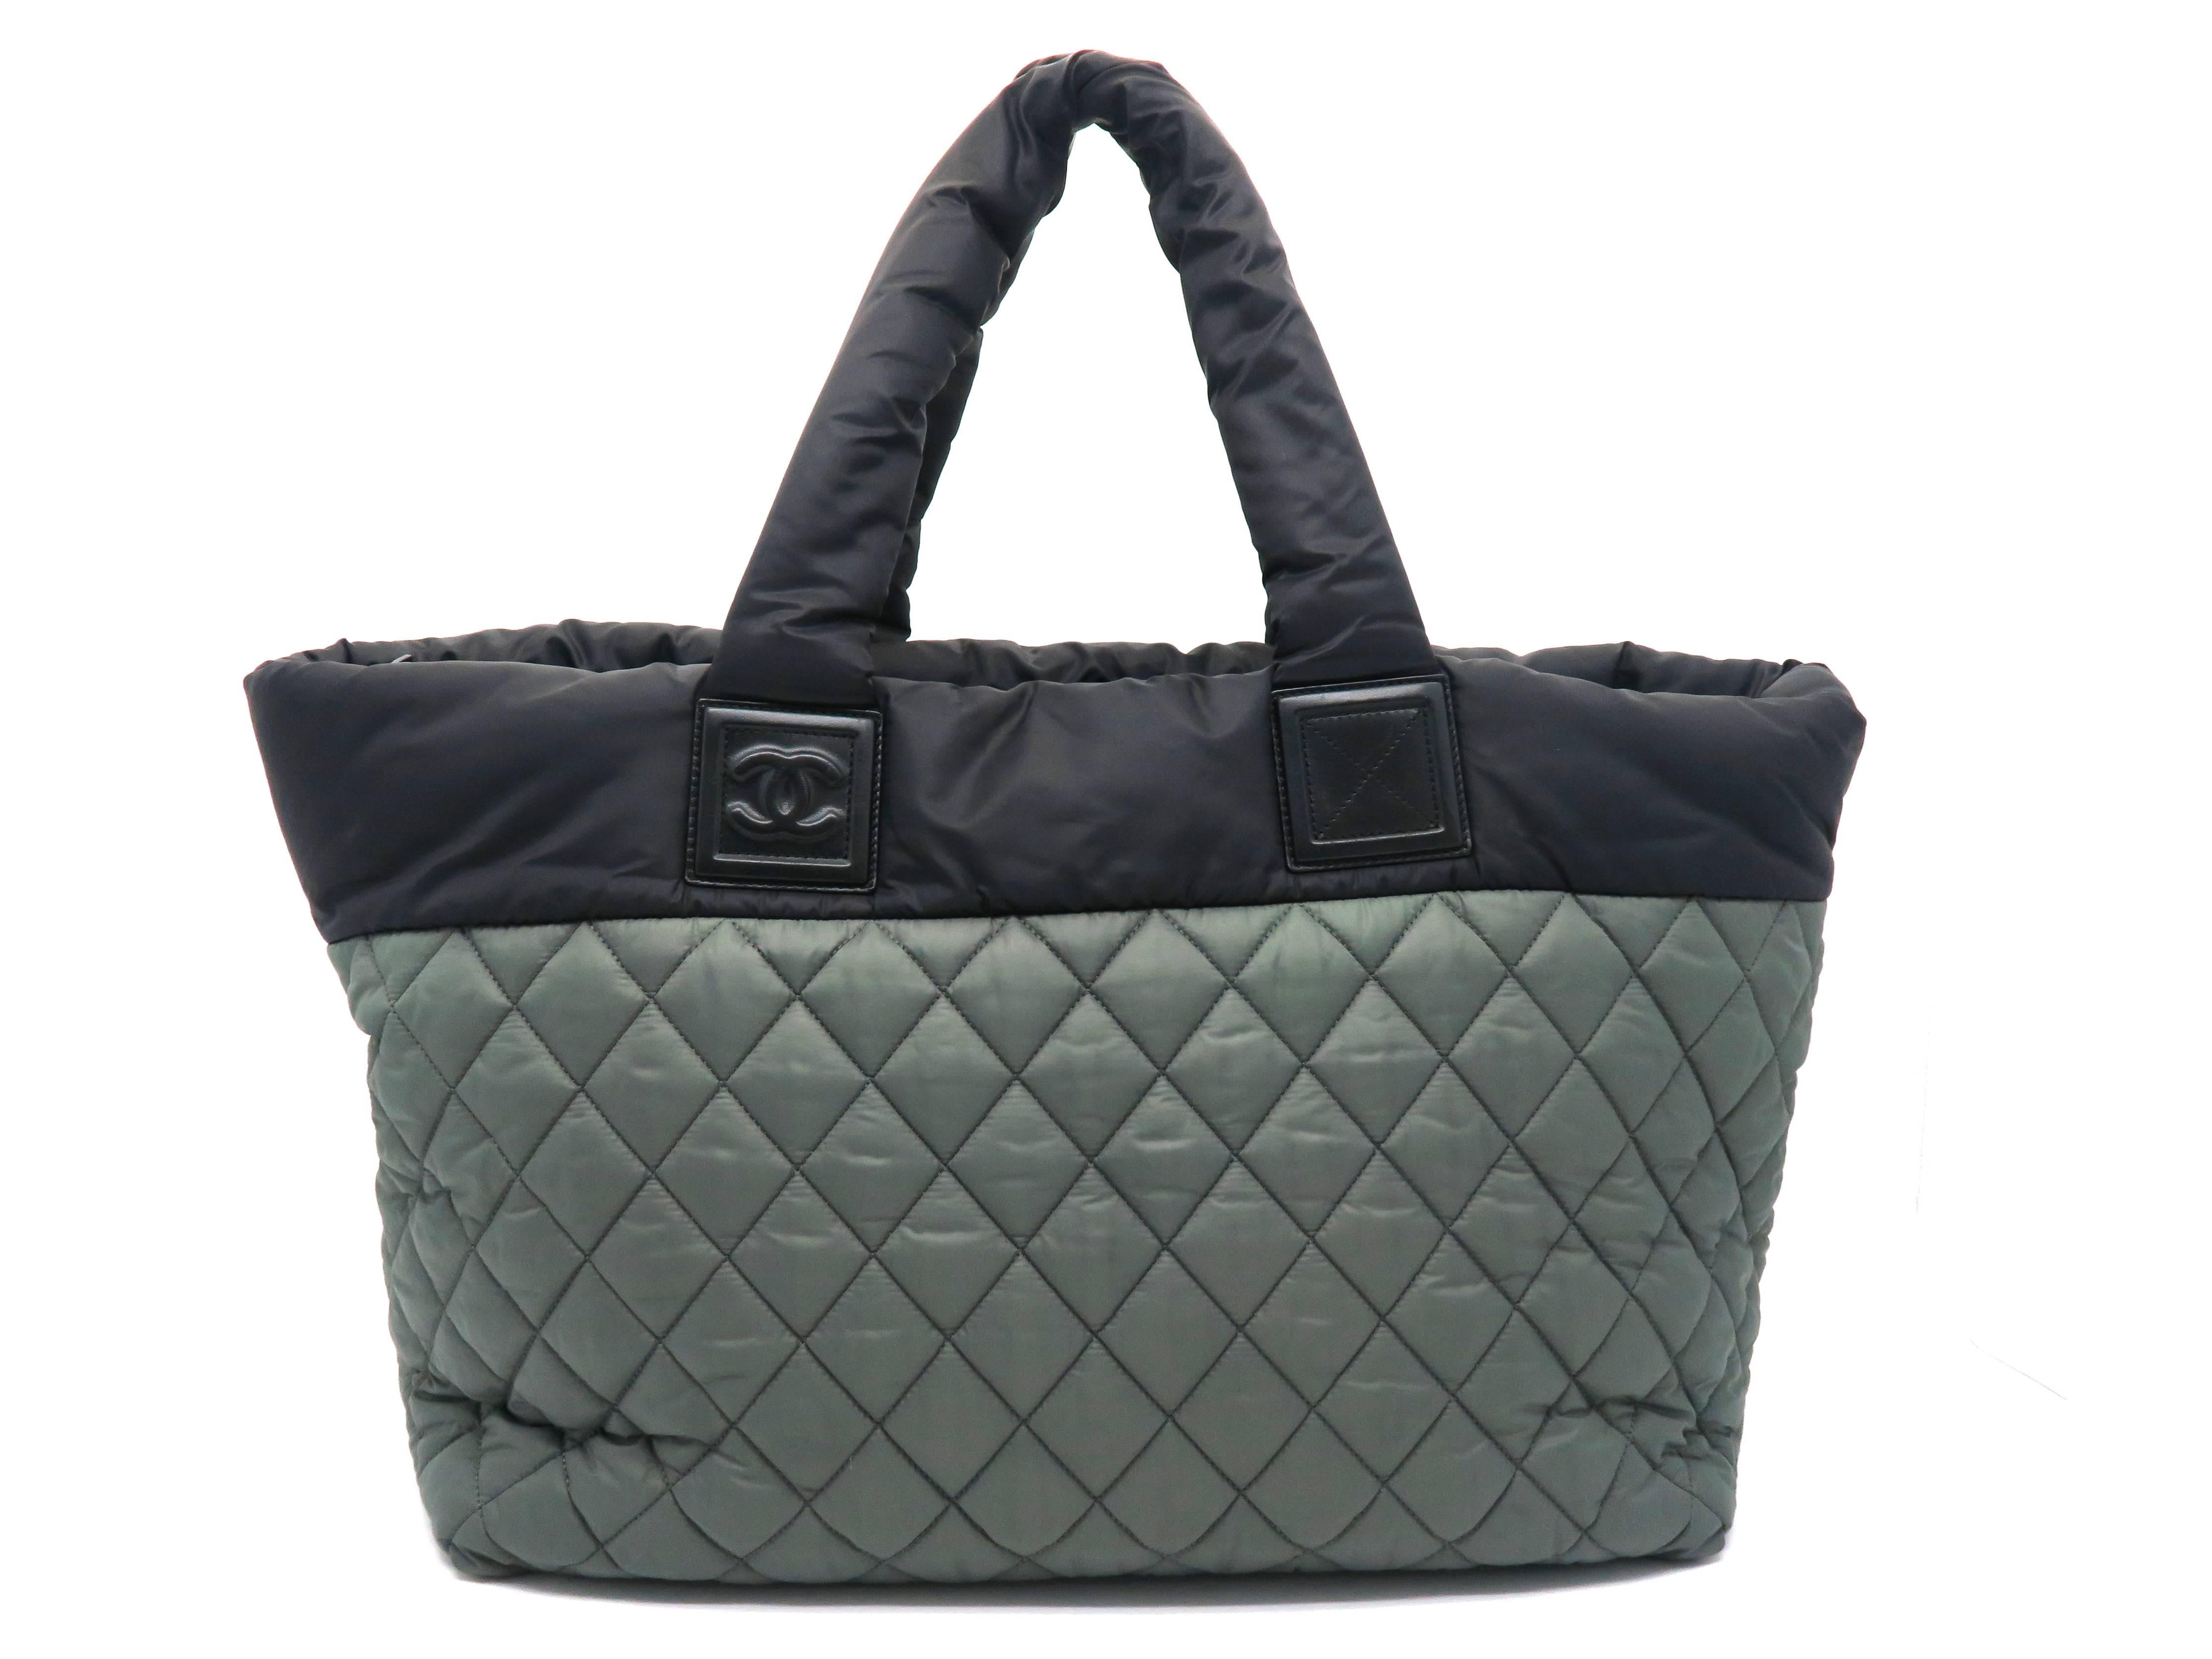 Chanel Coco Cocoon Green/ Black Nylon Shoulder Bag In Excellent Condition For Sale In Kowloon, HK